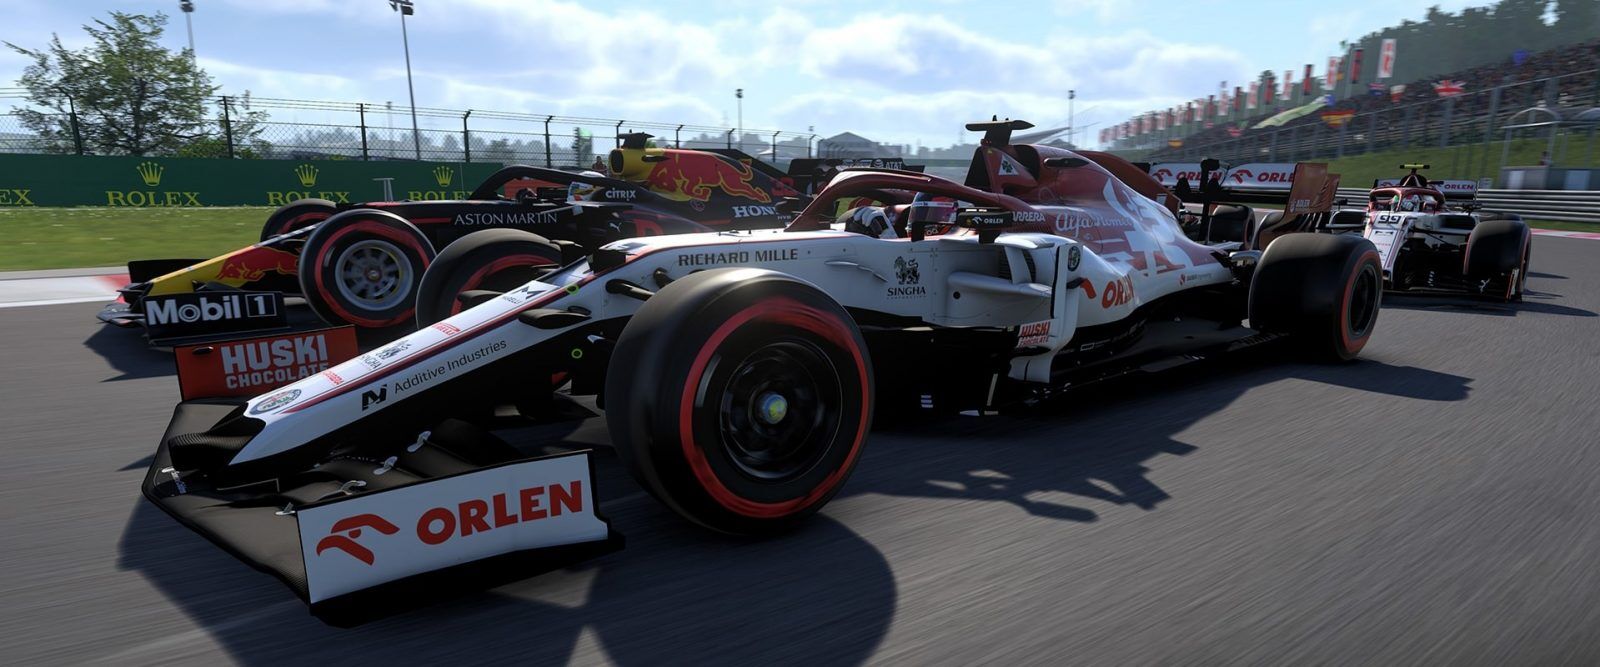 F1 2020 Guide: How to pick the winning strategy